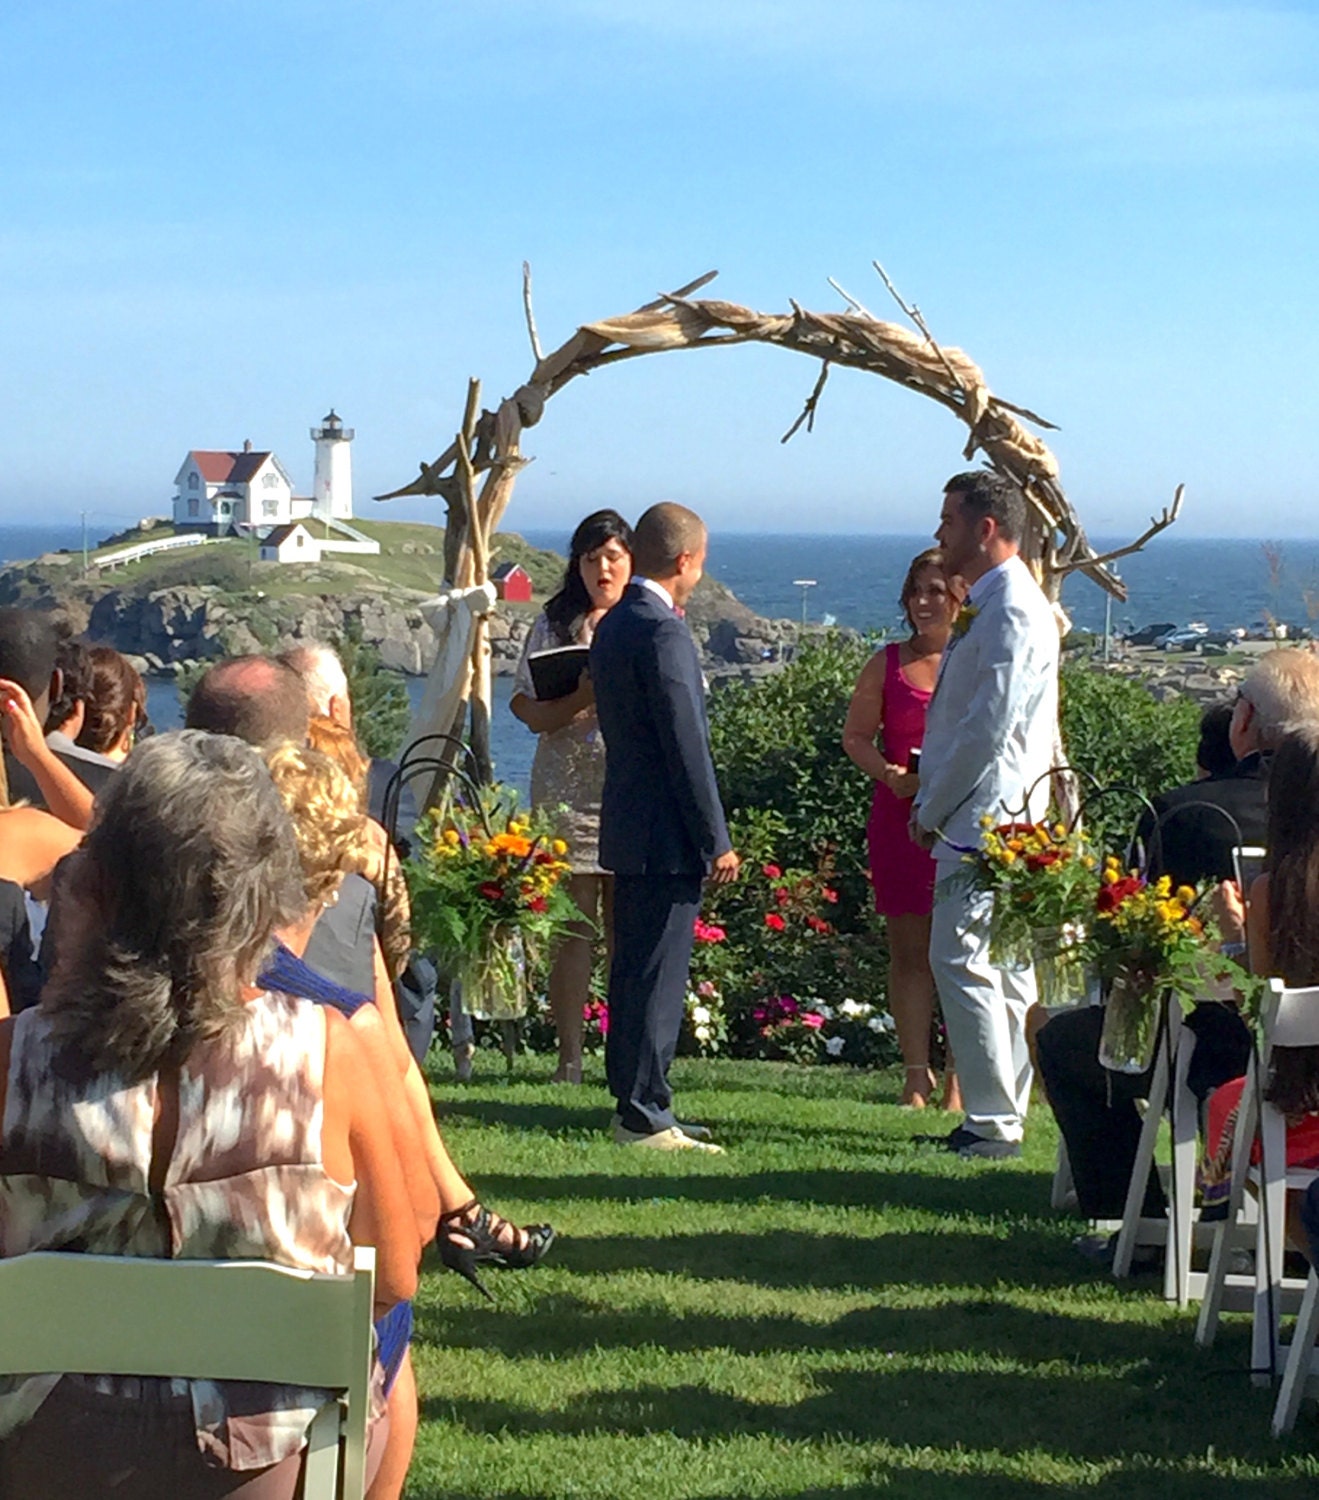 Chic Driftwood Wedding Arch - Curved Self-Standing Design for Unforgettable Ceremonies